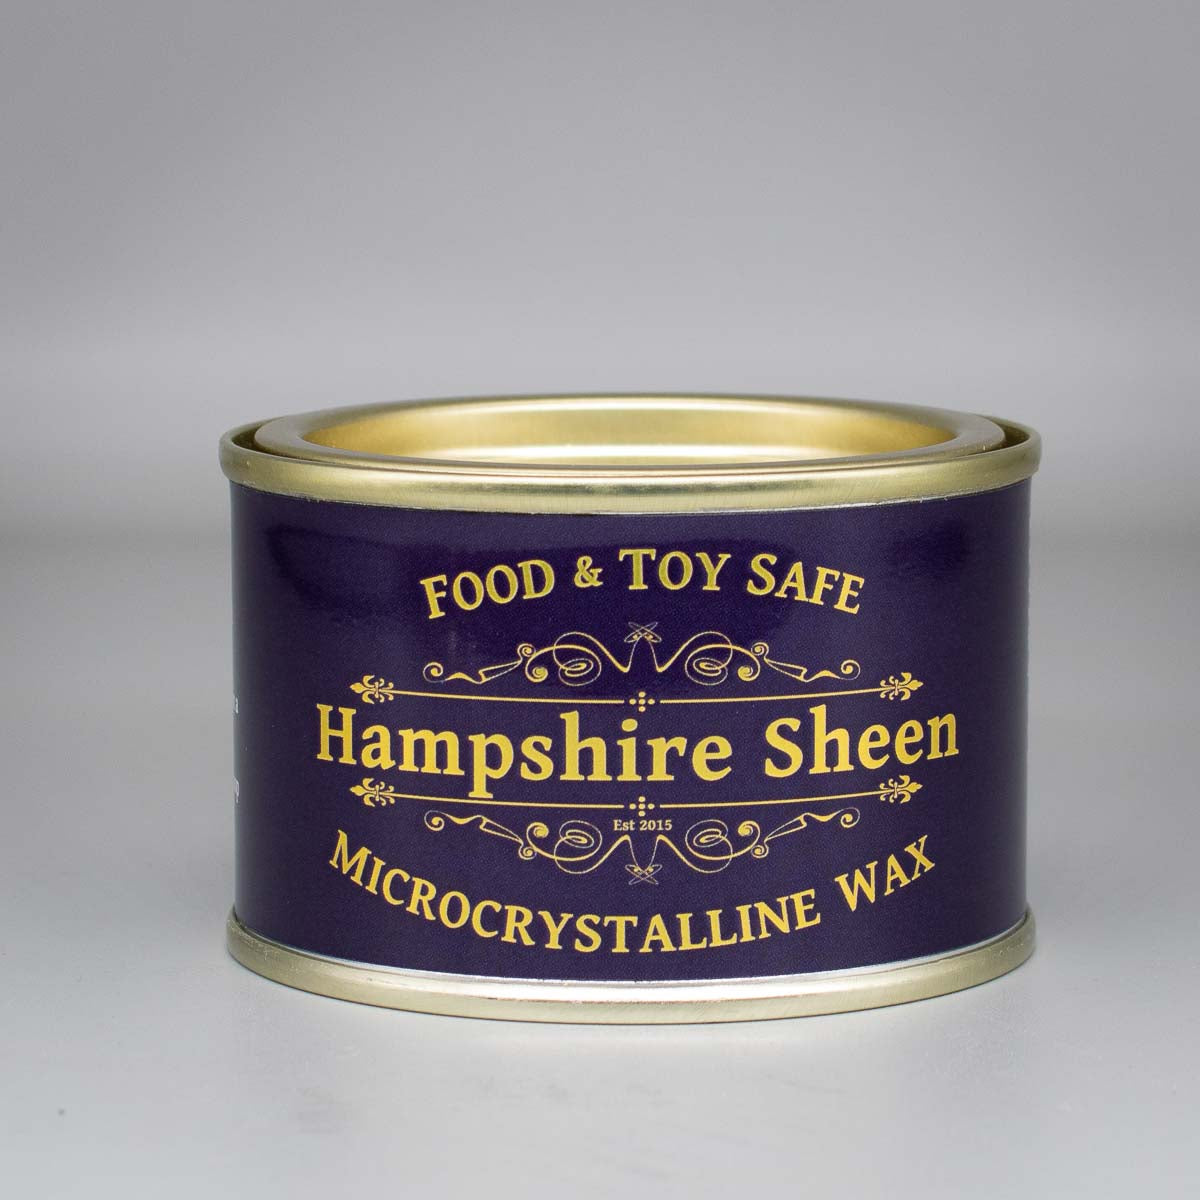 Hampshire Sheen Microcrystalline Wax – The Wooden Products Company